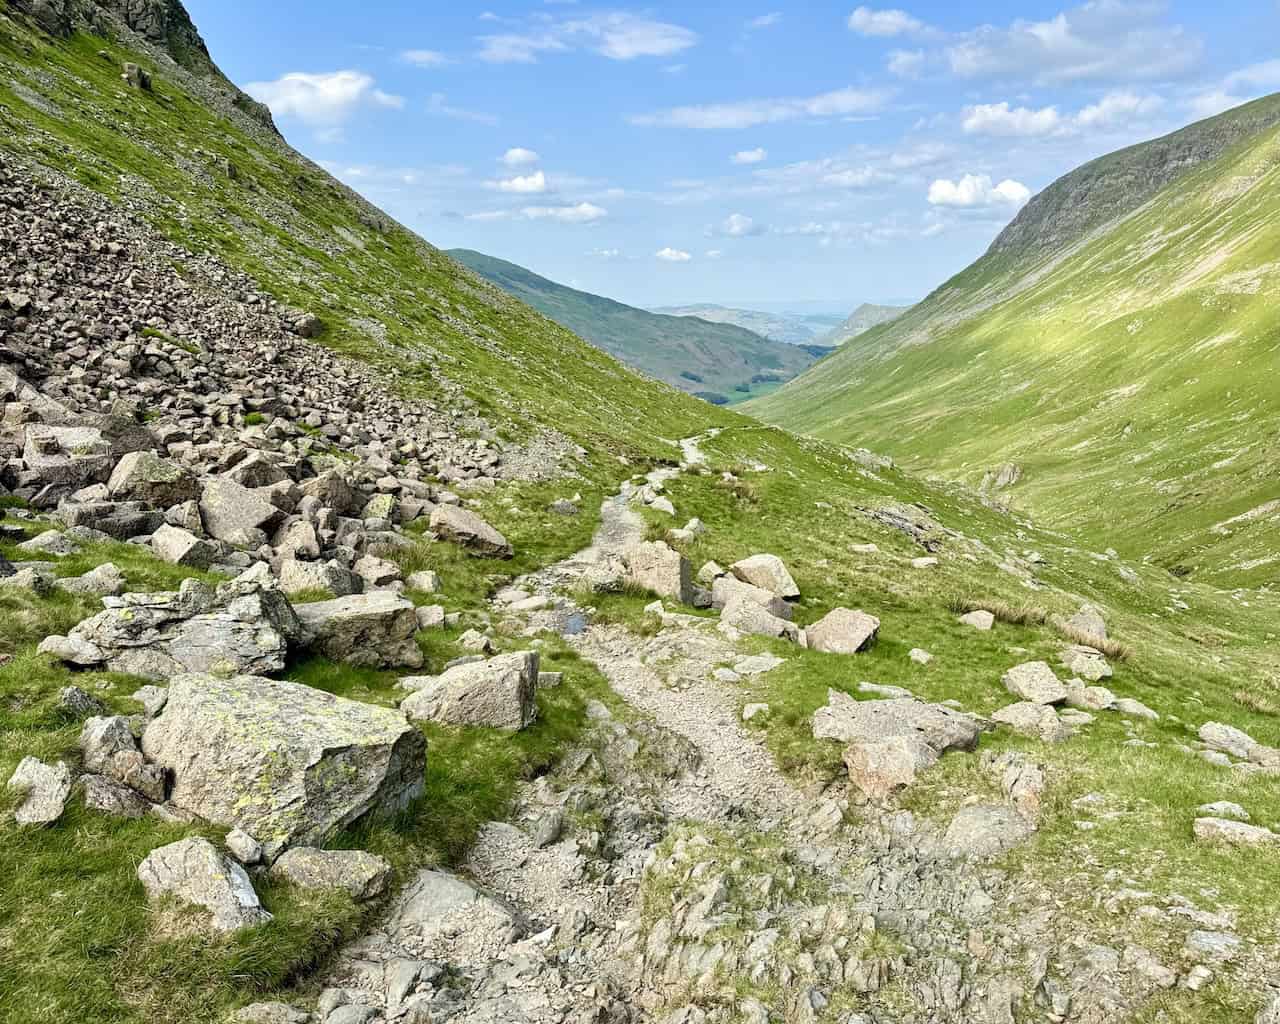 The start of the four-mile (6.4-kilometre) route from Grisedale Tarn through the valley to Patterdale is picturesque and inviting.